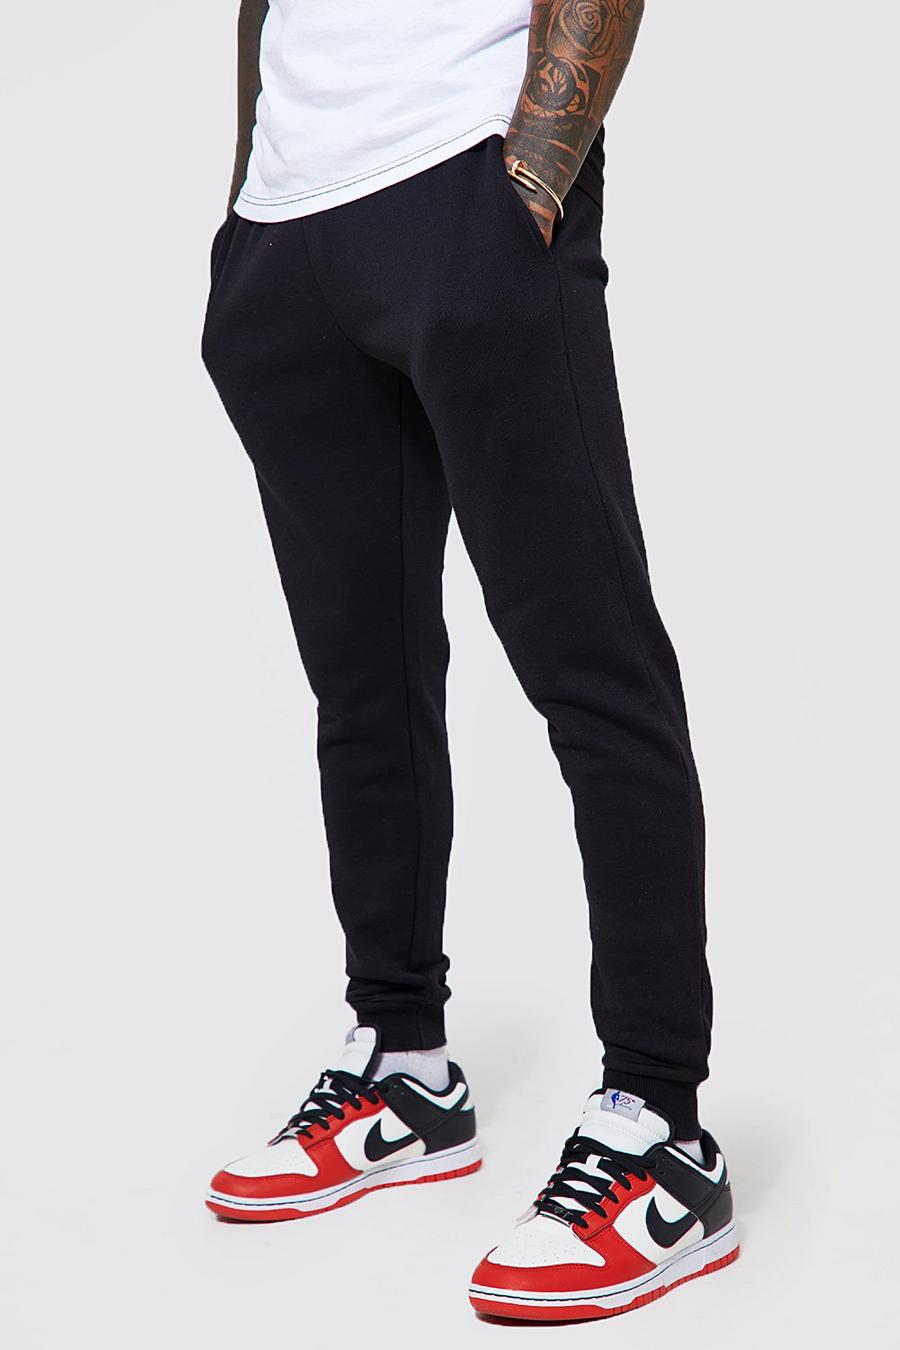 Black Basic Skinny Fit Jogger with REEL Cotton